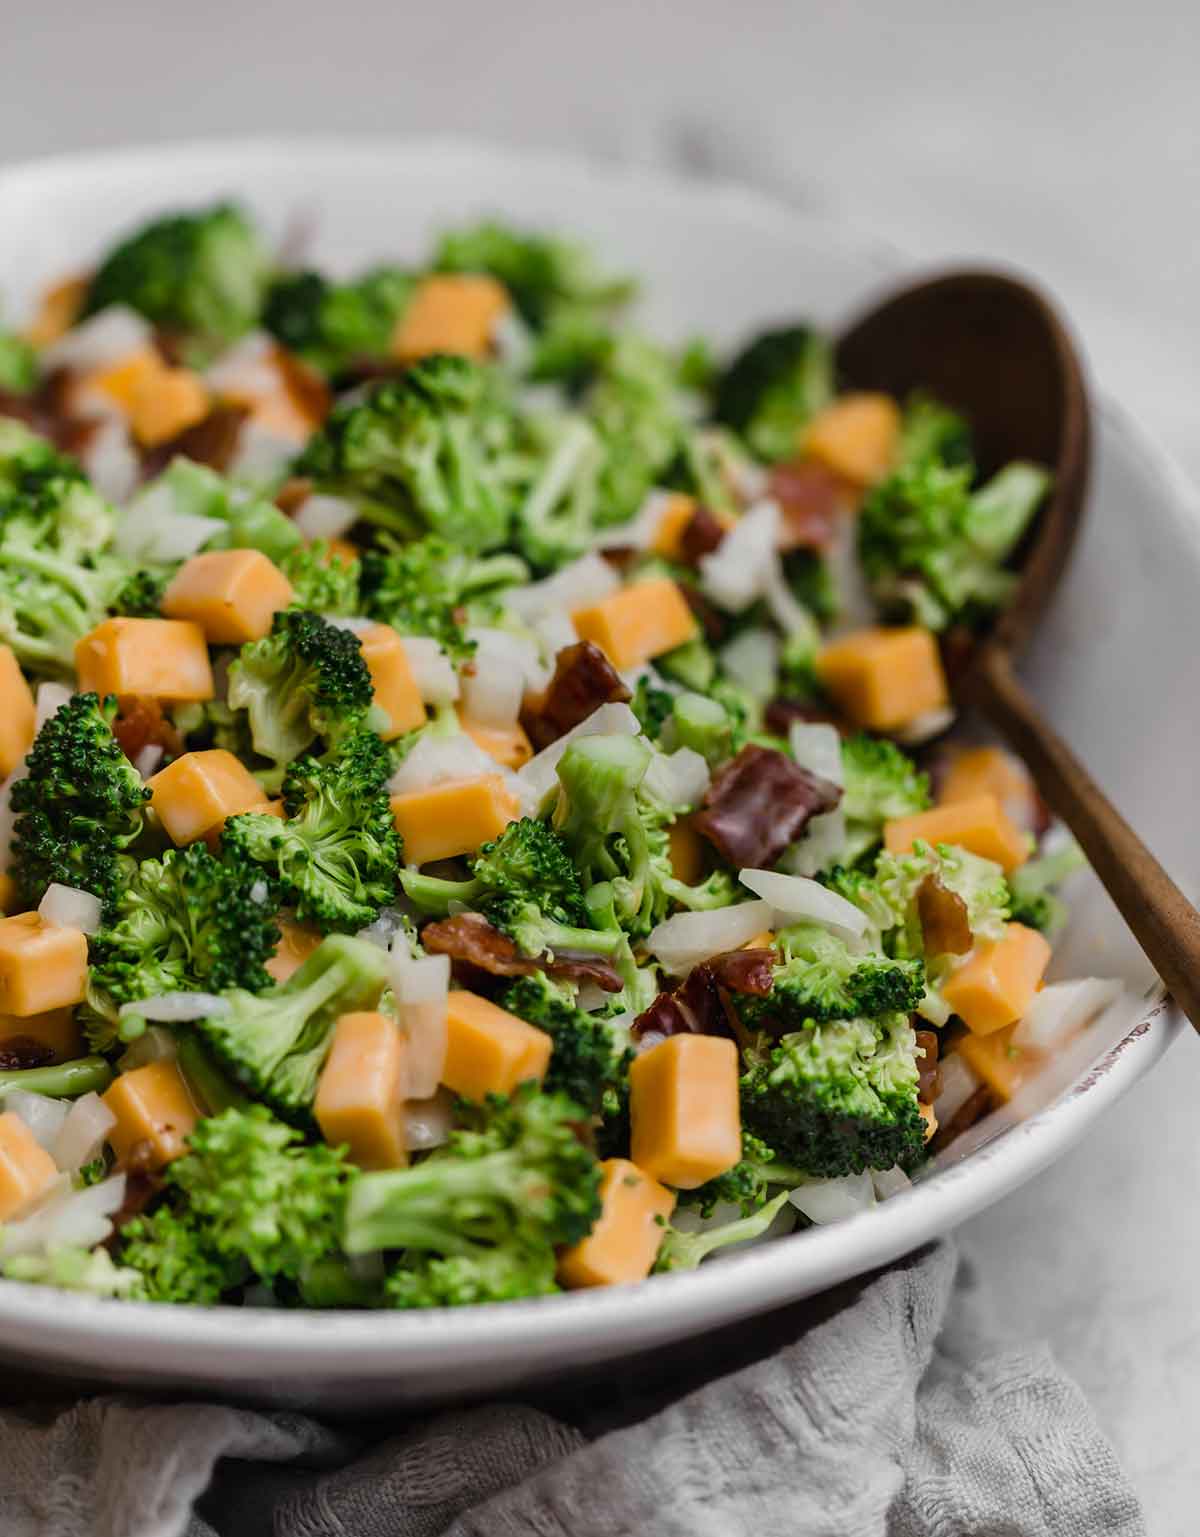 Close up photo of broccoli salad in a white bowl with a wooden serving spoon.